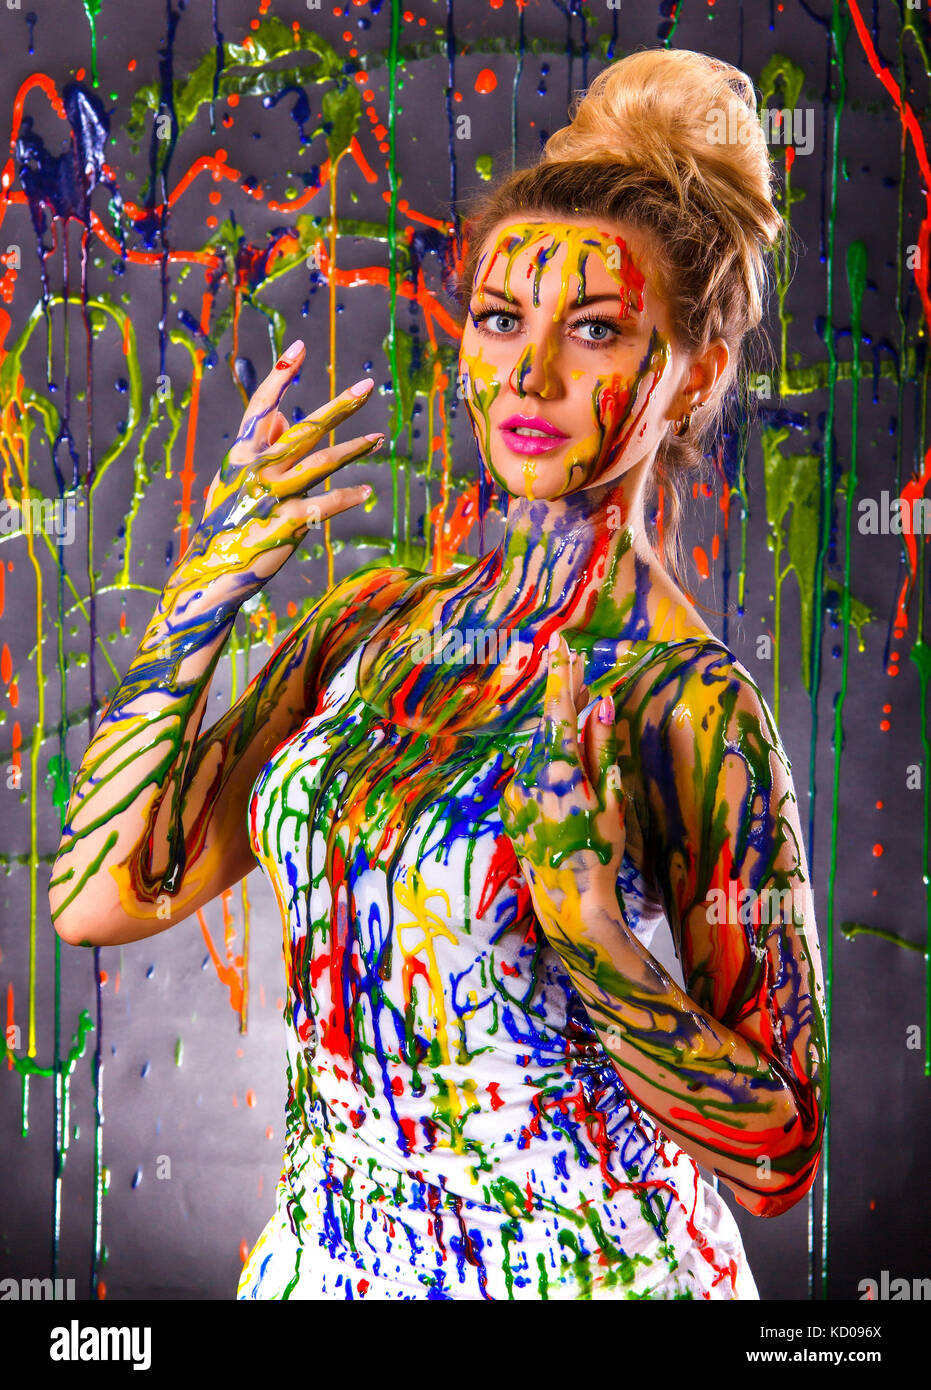 Beautiful young woman covered with multicolored paints Stock Photo